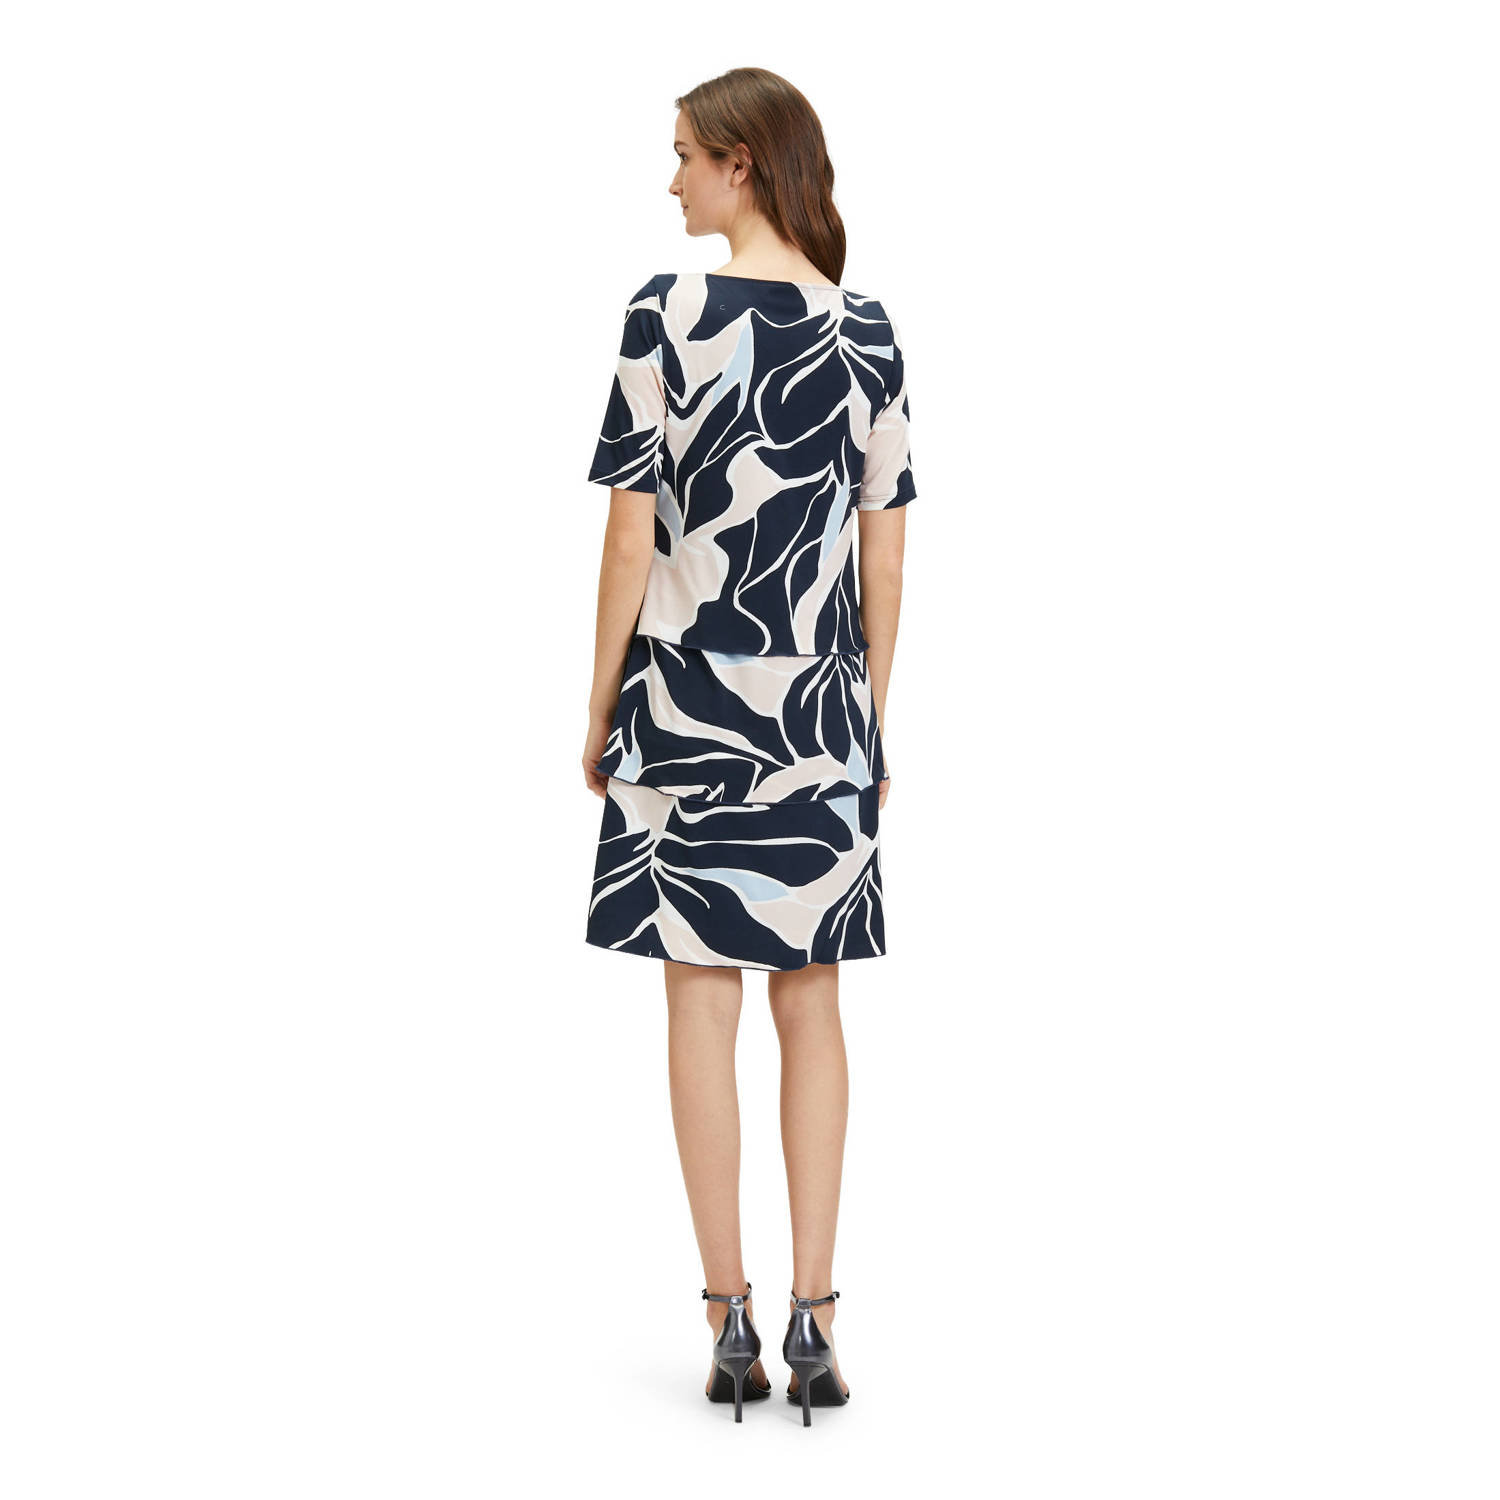 Betty Barclay jurk met all over print donkerblauw lichtroze